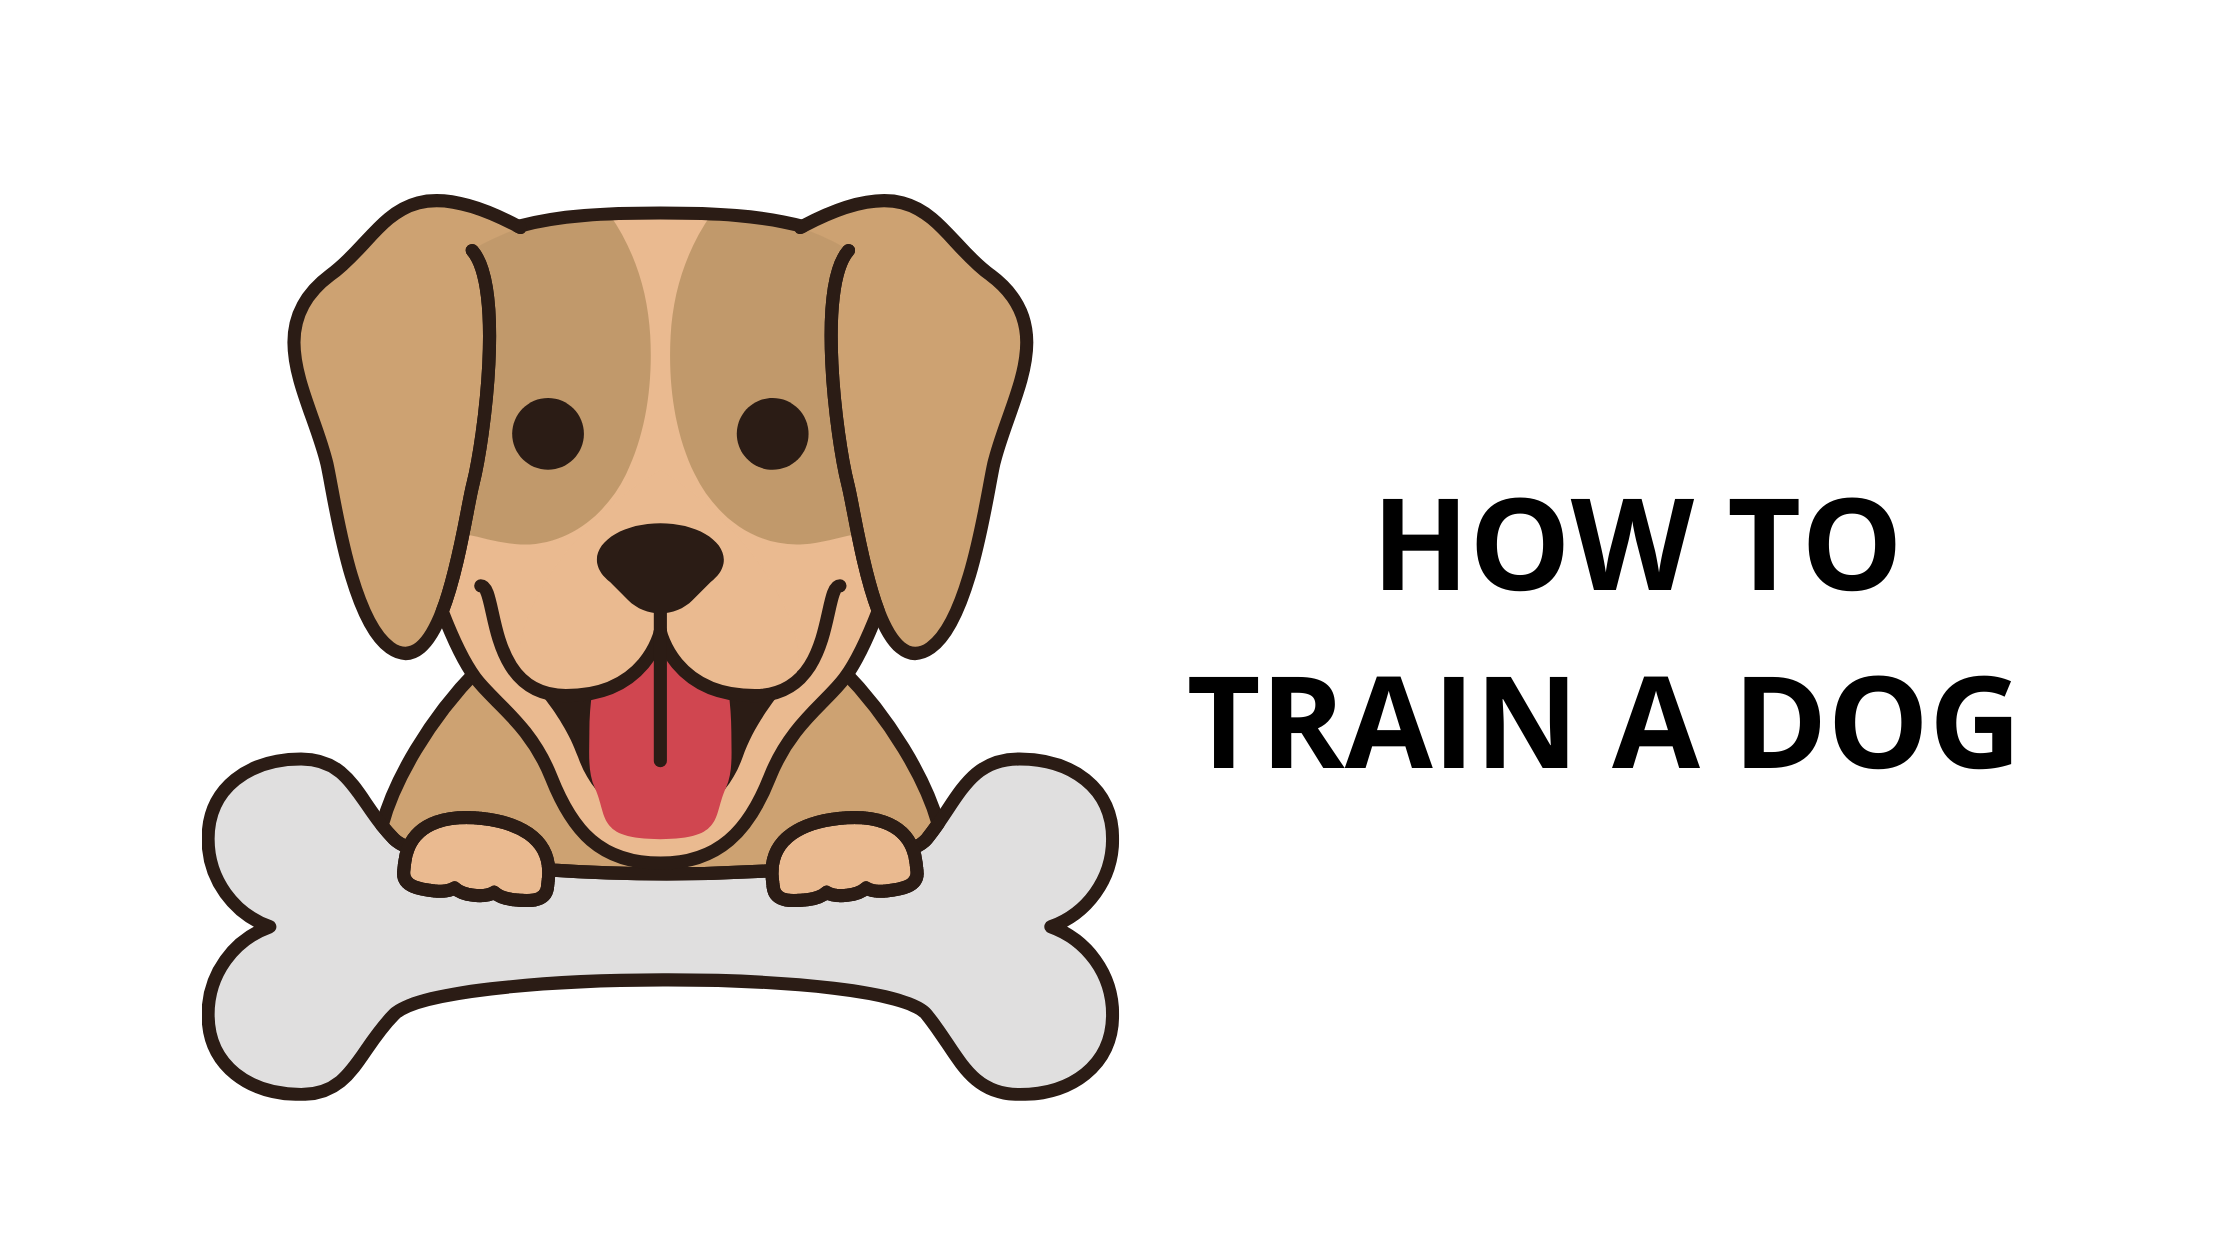 HOW TO TRAIN A DOG